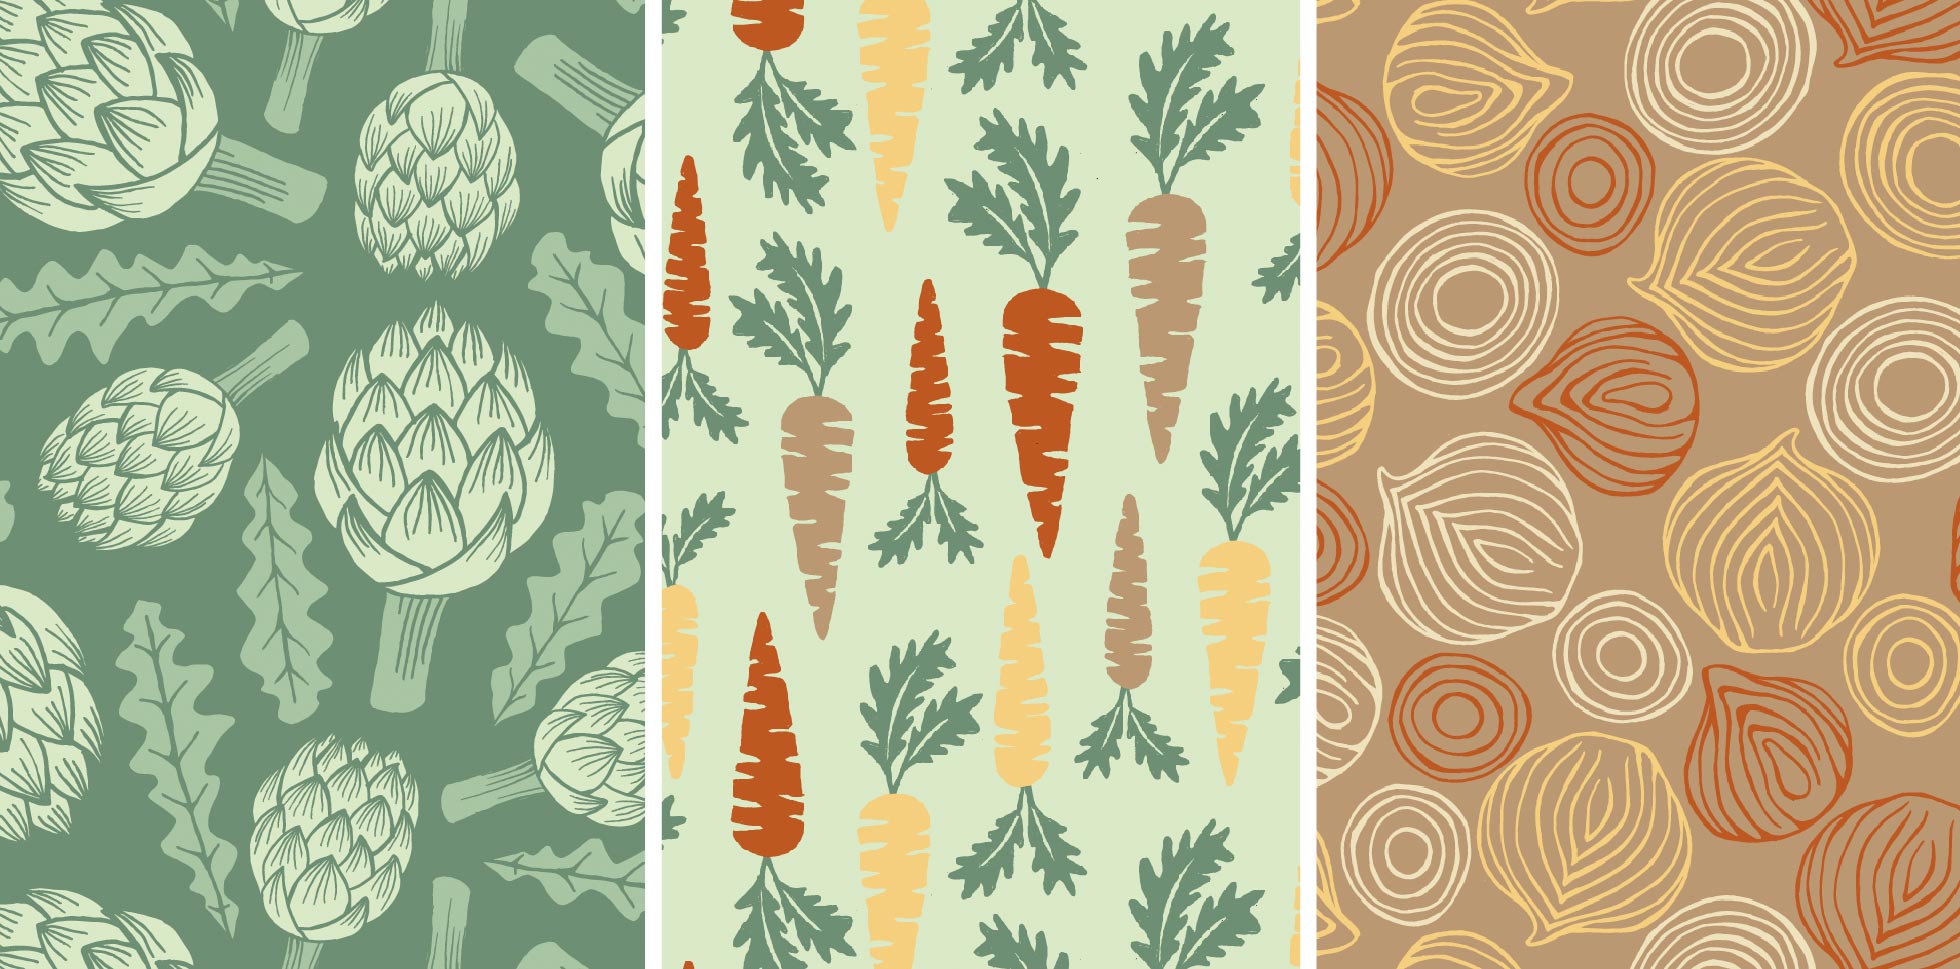 Vegetable patch novelty pattern design collection from Studio Element